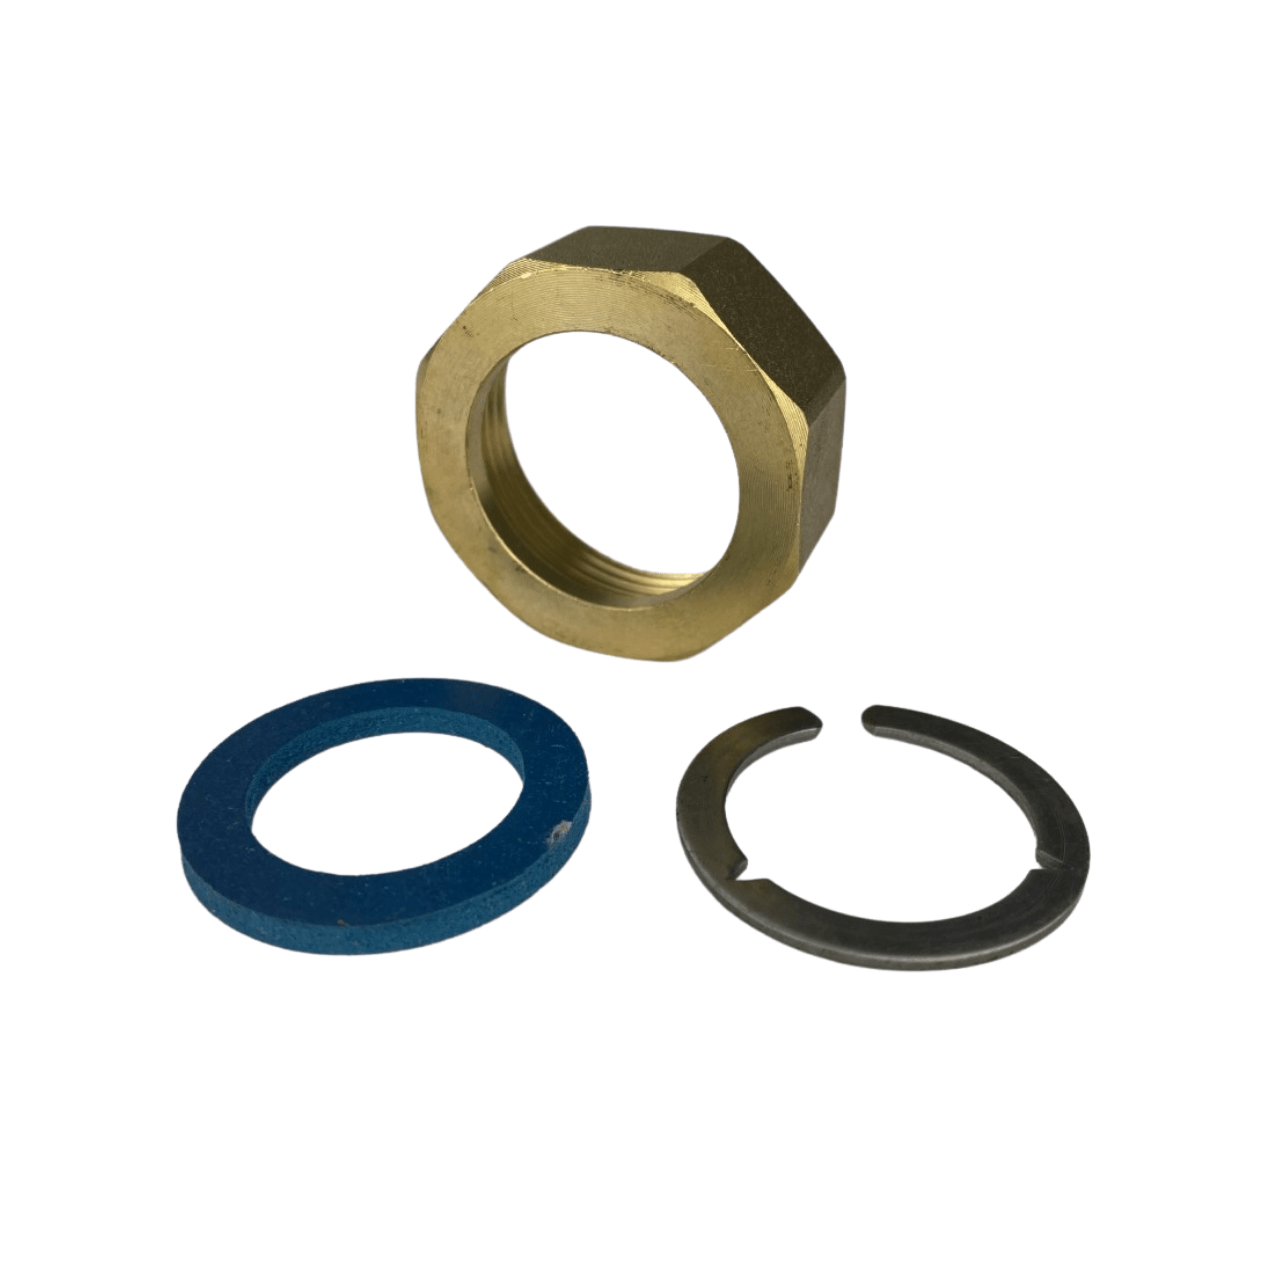 Brass Threaded Nut, Cir-Clip and Gasket for Corrugated Stainless Steel Hose end connection